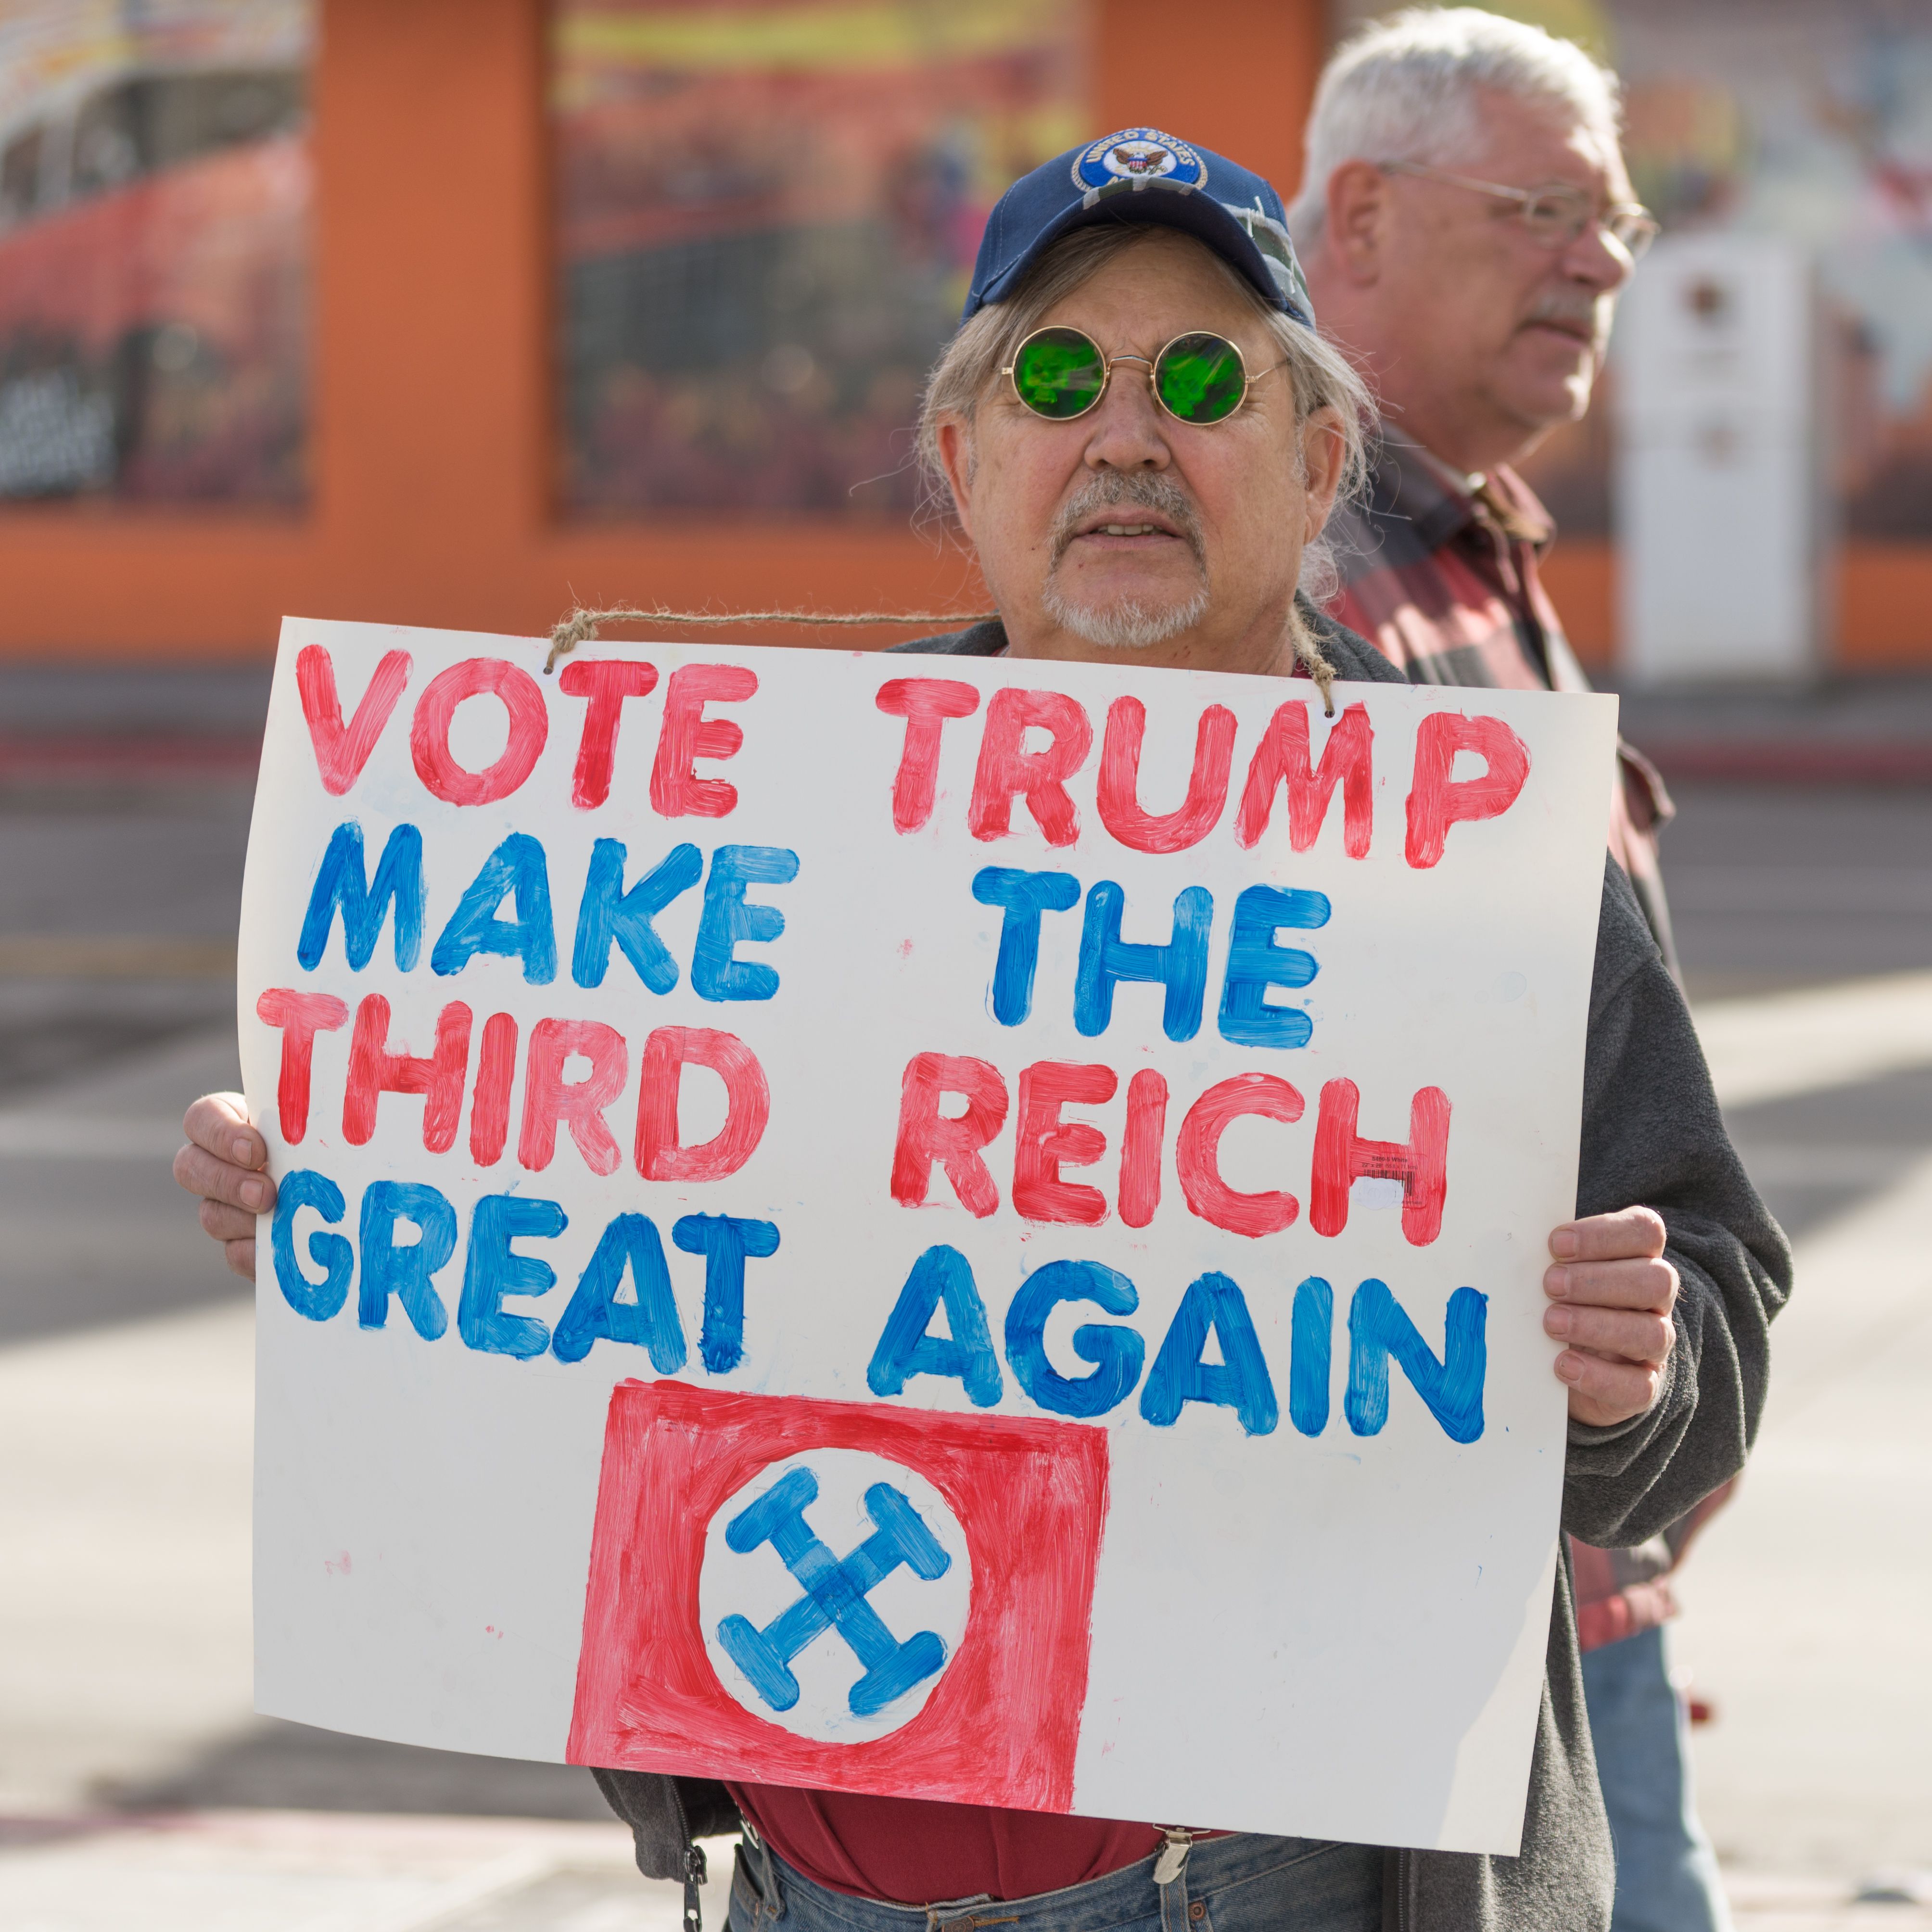 A sign on display at a rally in Reno, Nevada.